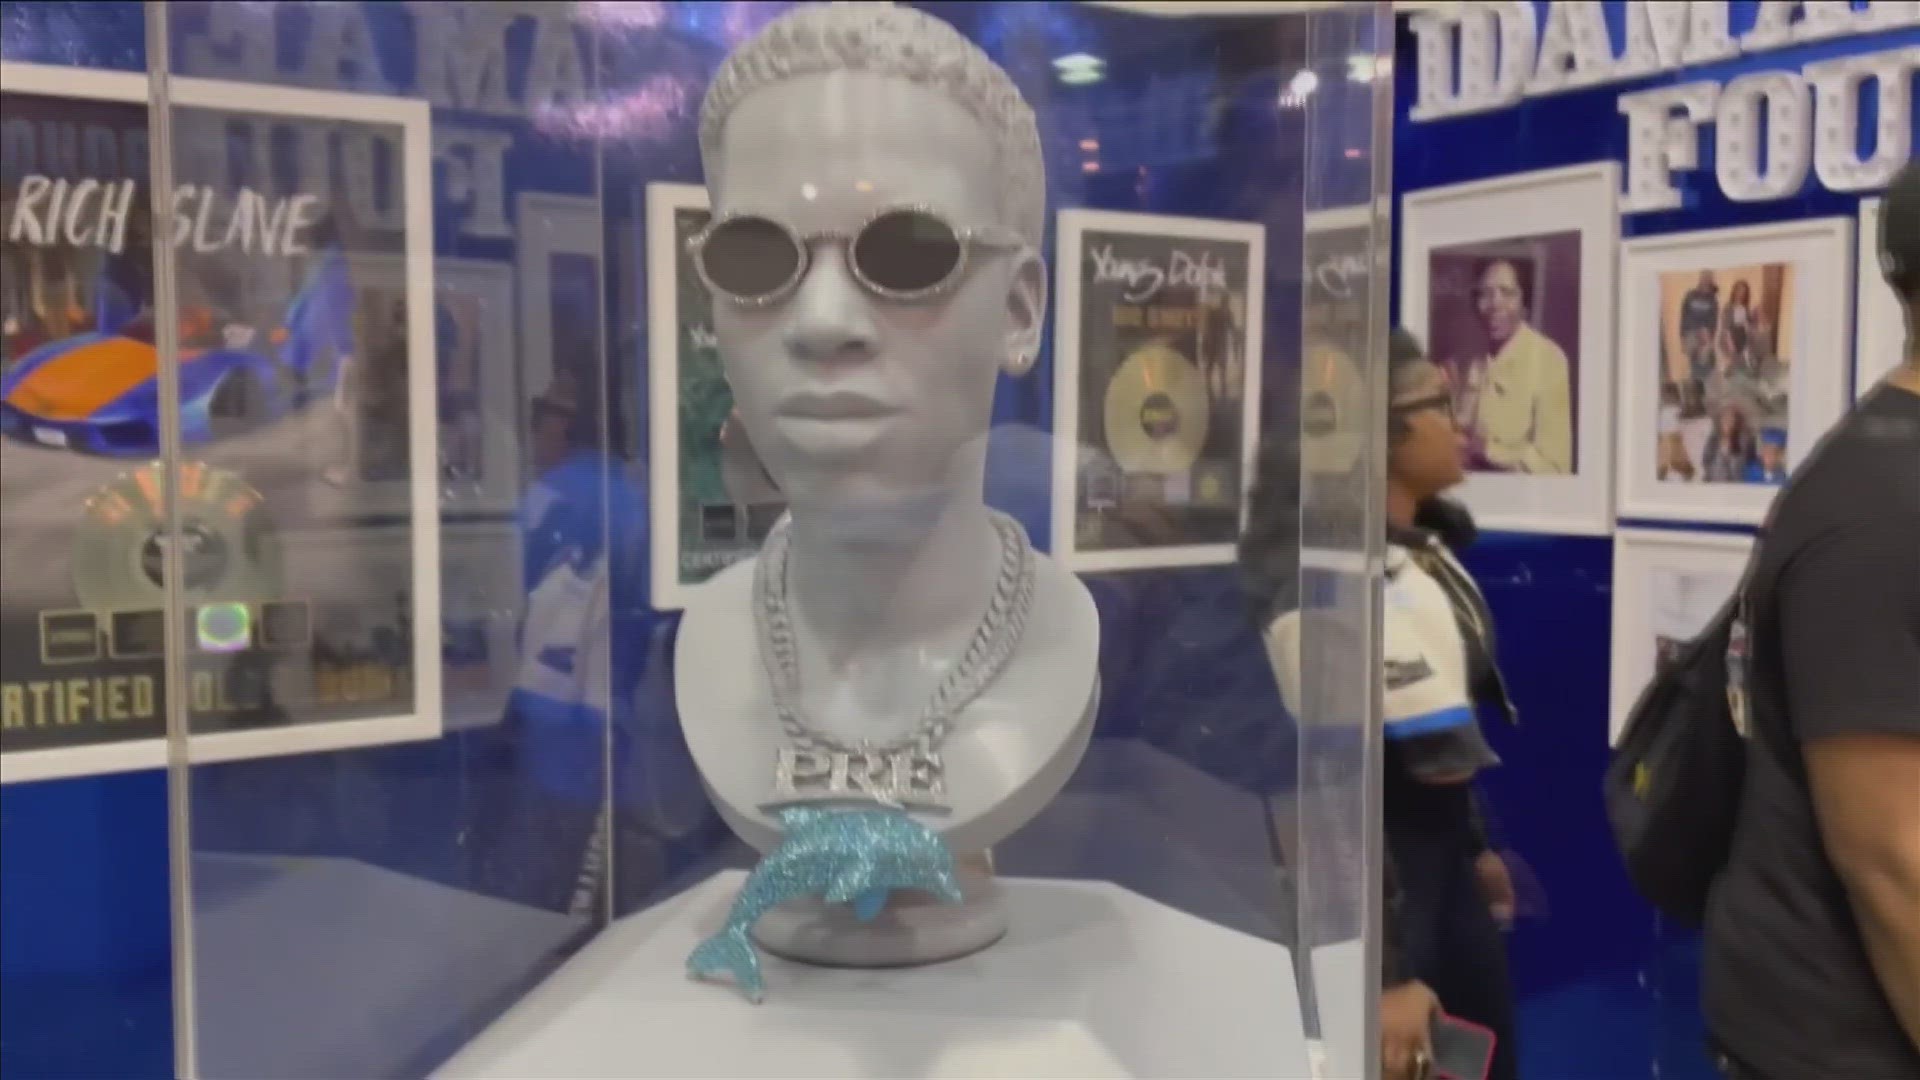 The Dolphland pop-up museum serves as a tribute to Young Dolph's life, his career and the positive impact he made on his fans and Memphis as a whole.